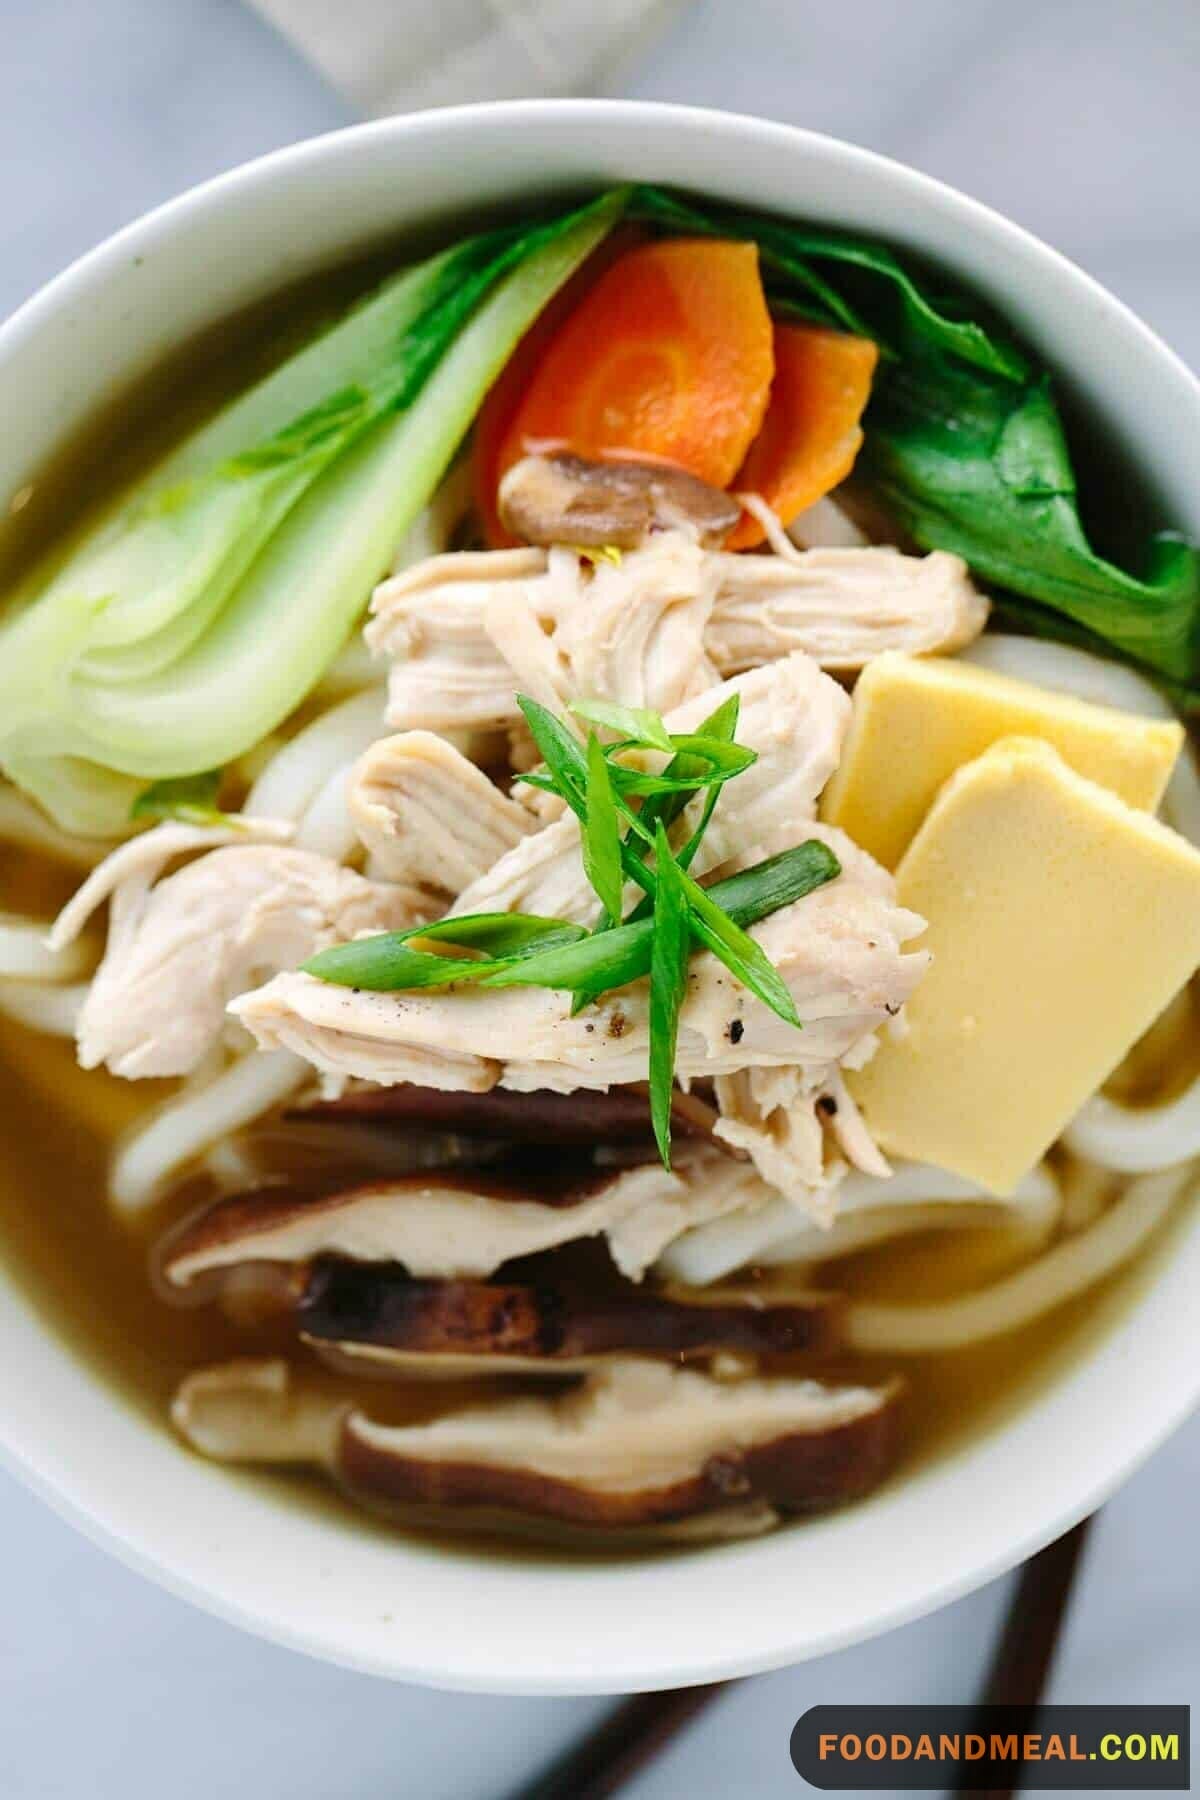 Japanese Vegetable Chicken Soup